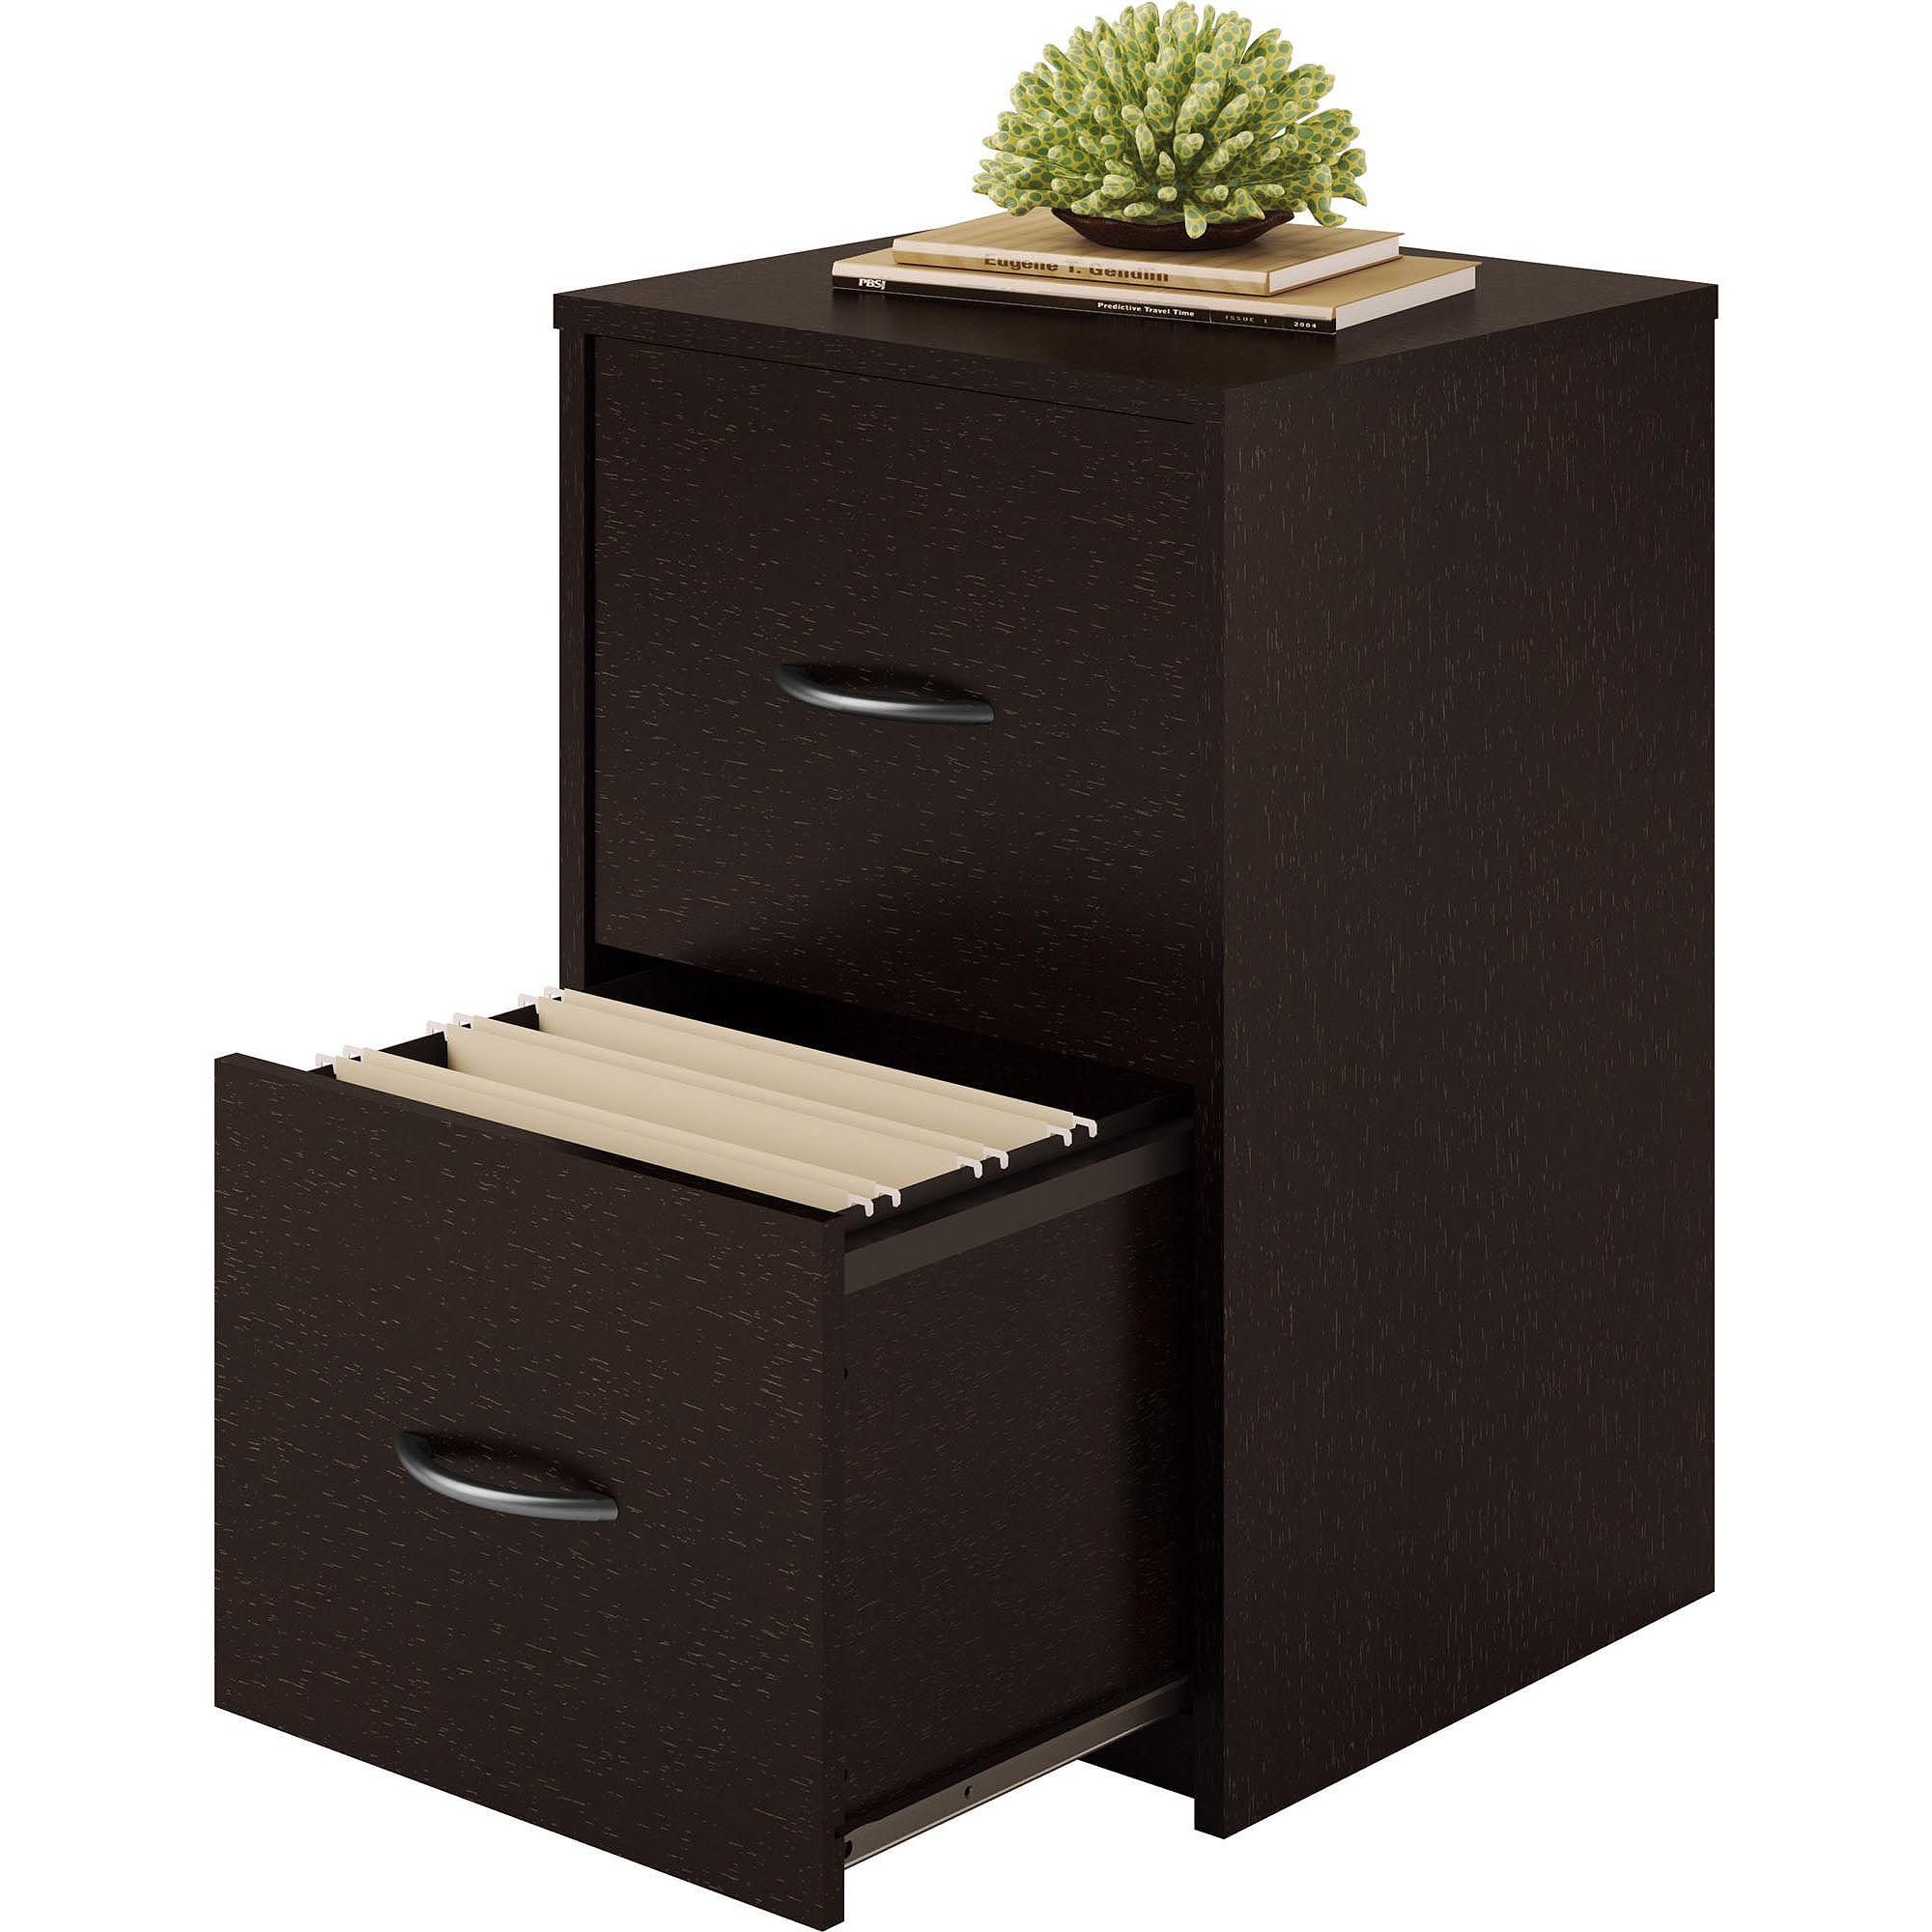 Ameriwood Home Core 2 Drawer File Cabinet, Espresso - image 2 of 5